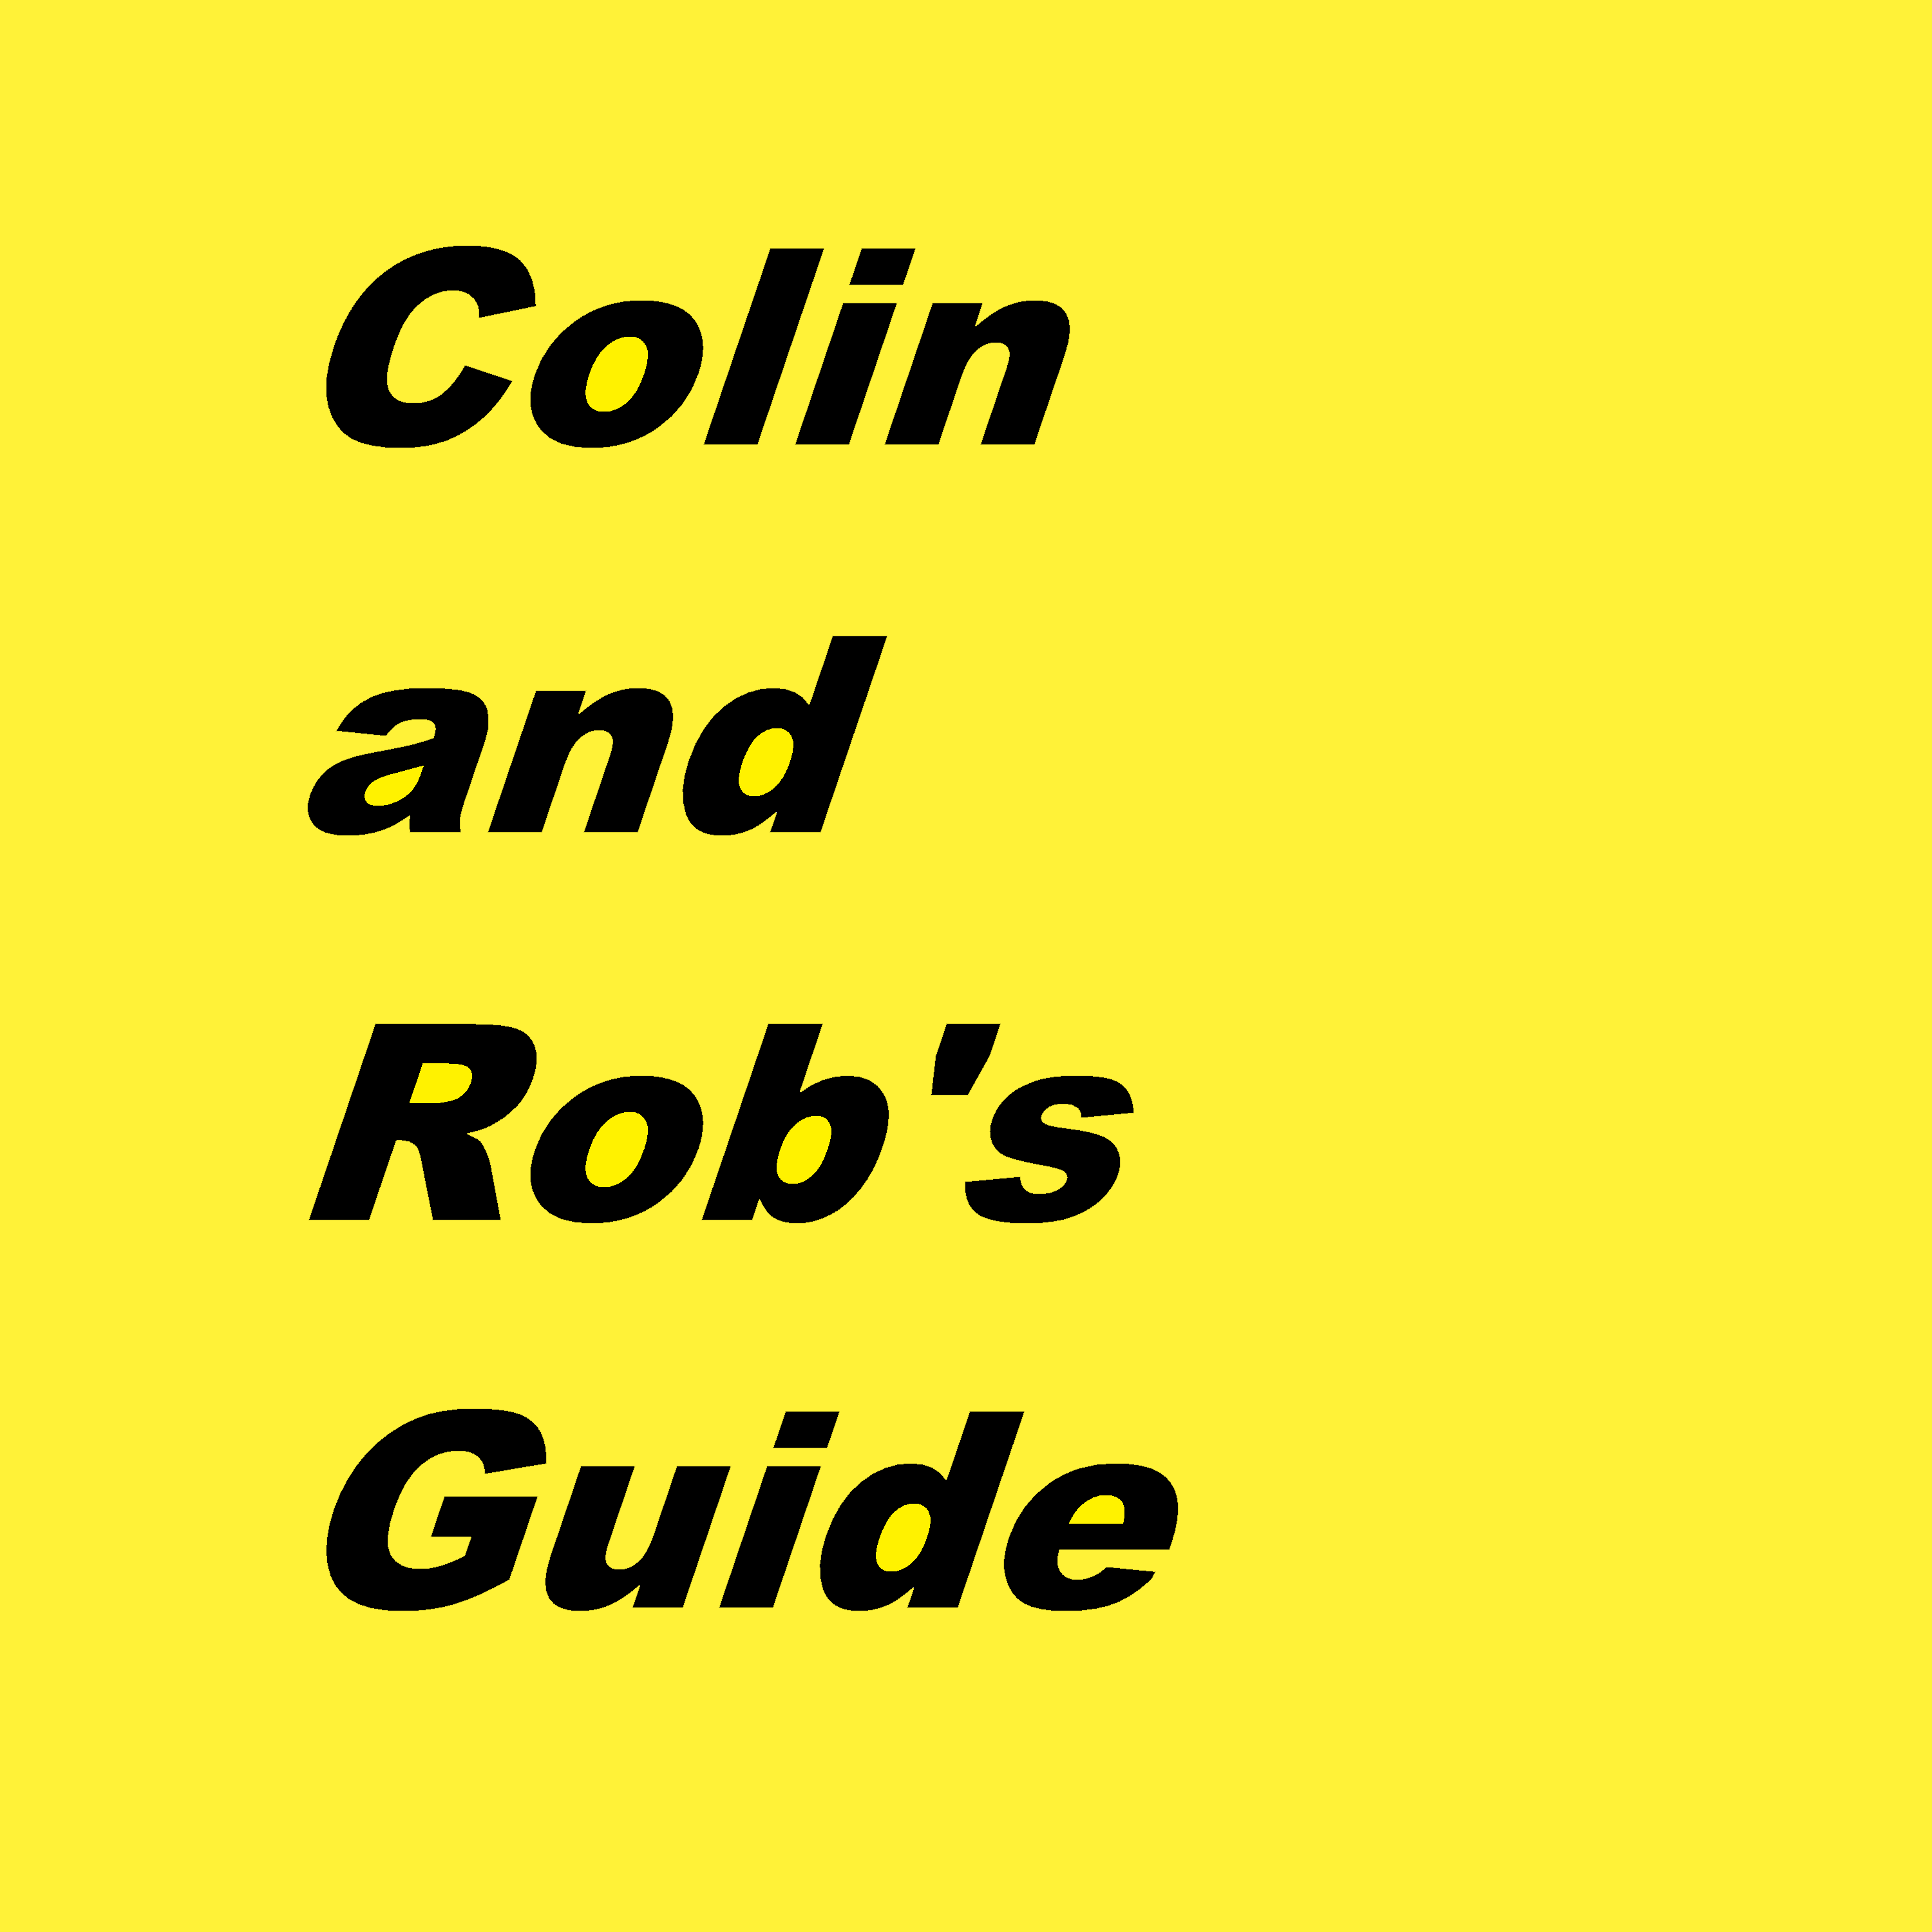 Artwork for Colin and Rob's guide to...